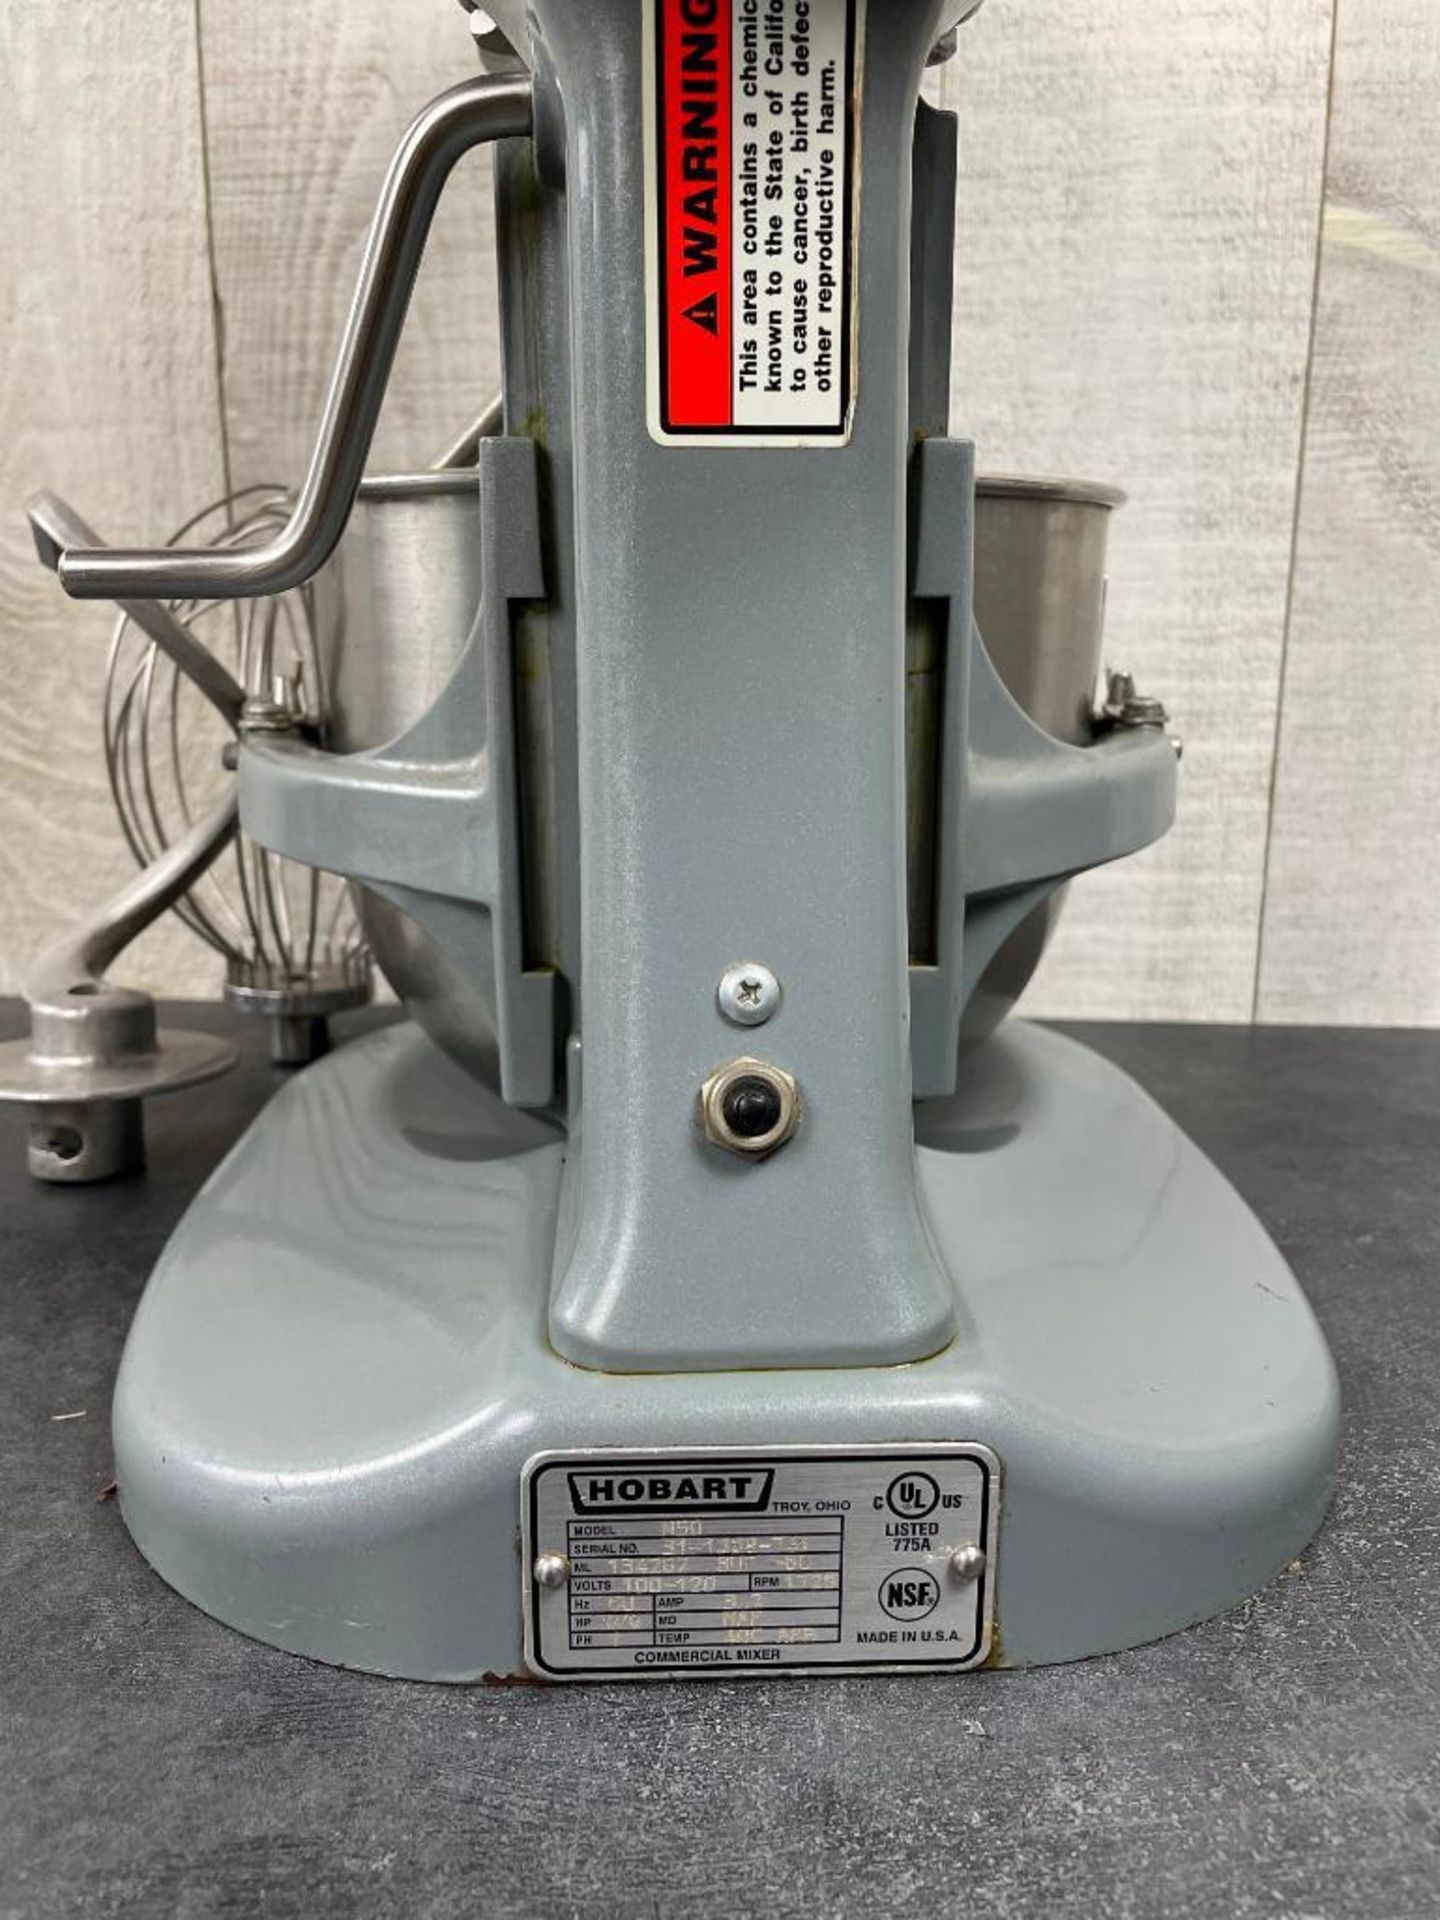 HOBART N50 5QT MIXER WITH HOOK, WHIP, PADDLE - Image 9 of 9